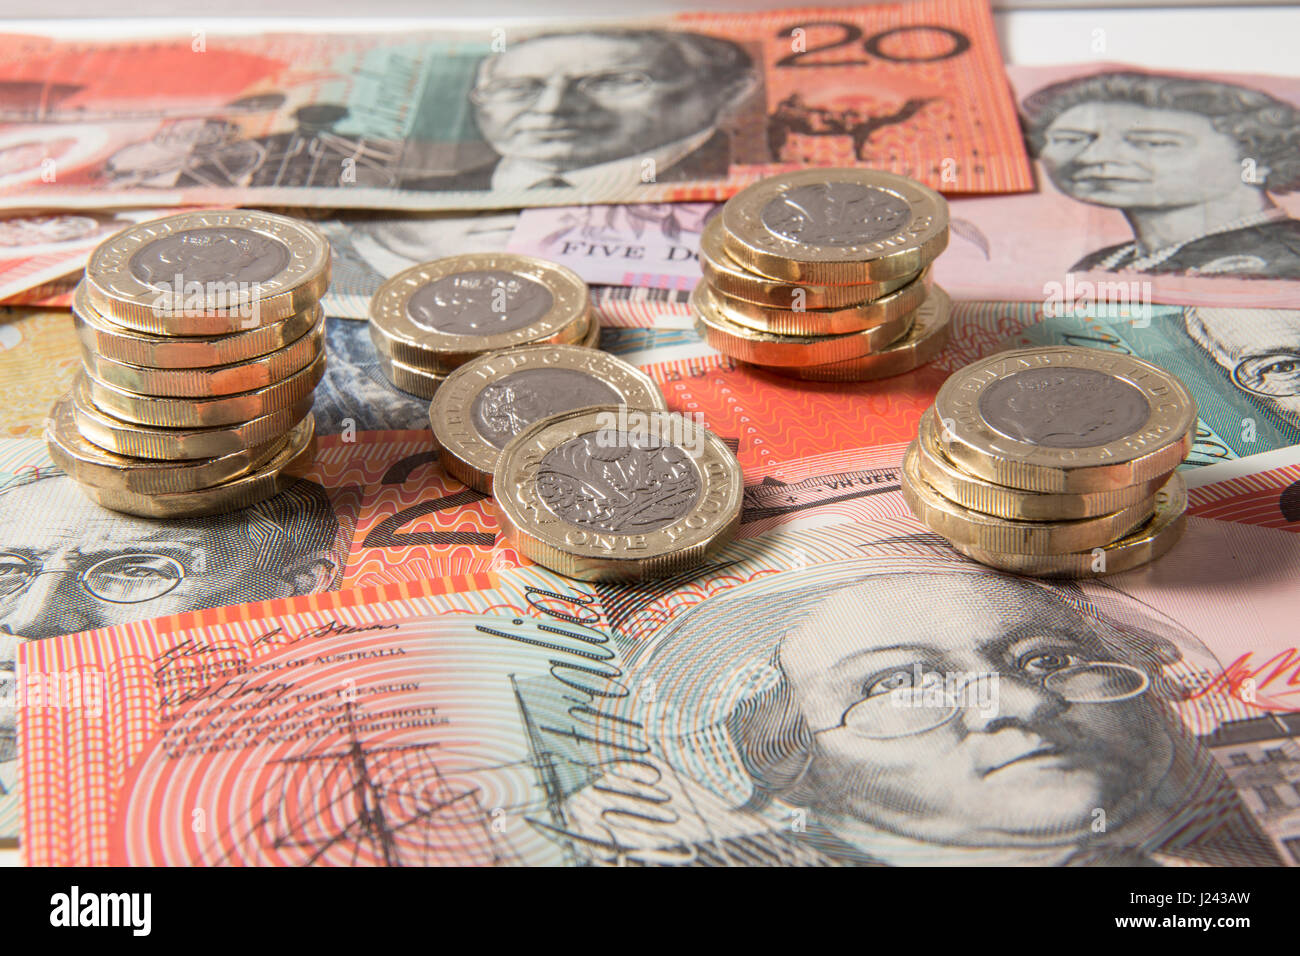 New British £1 Coins on a background of Australian Dollars Stock Photo